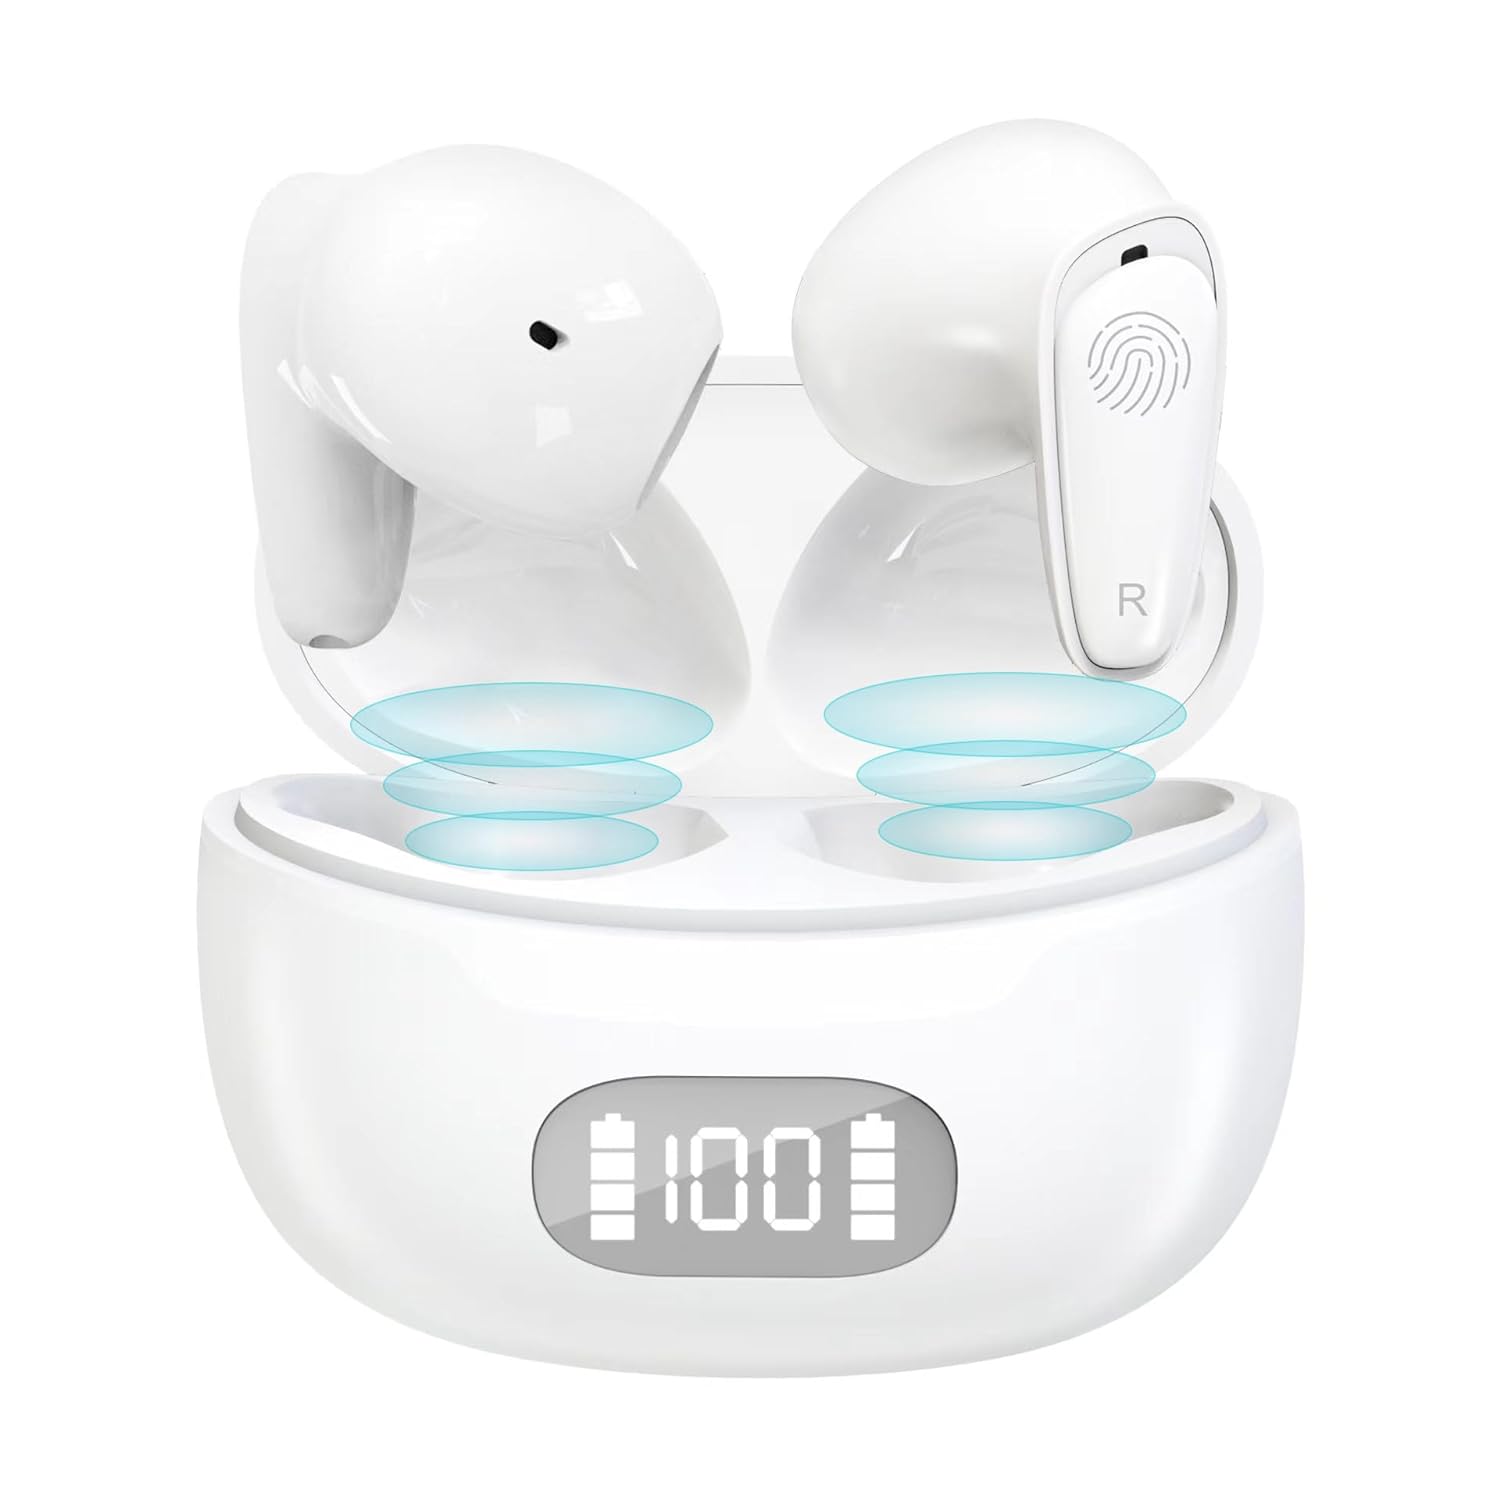 Personal Sound Hearing Amplifier Review